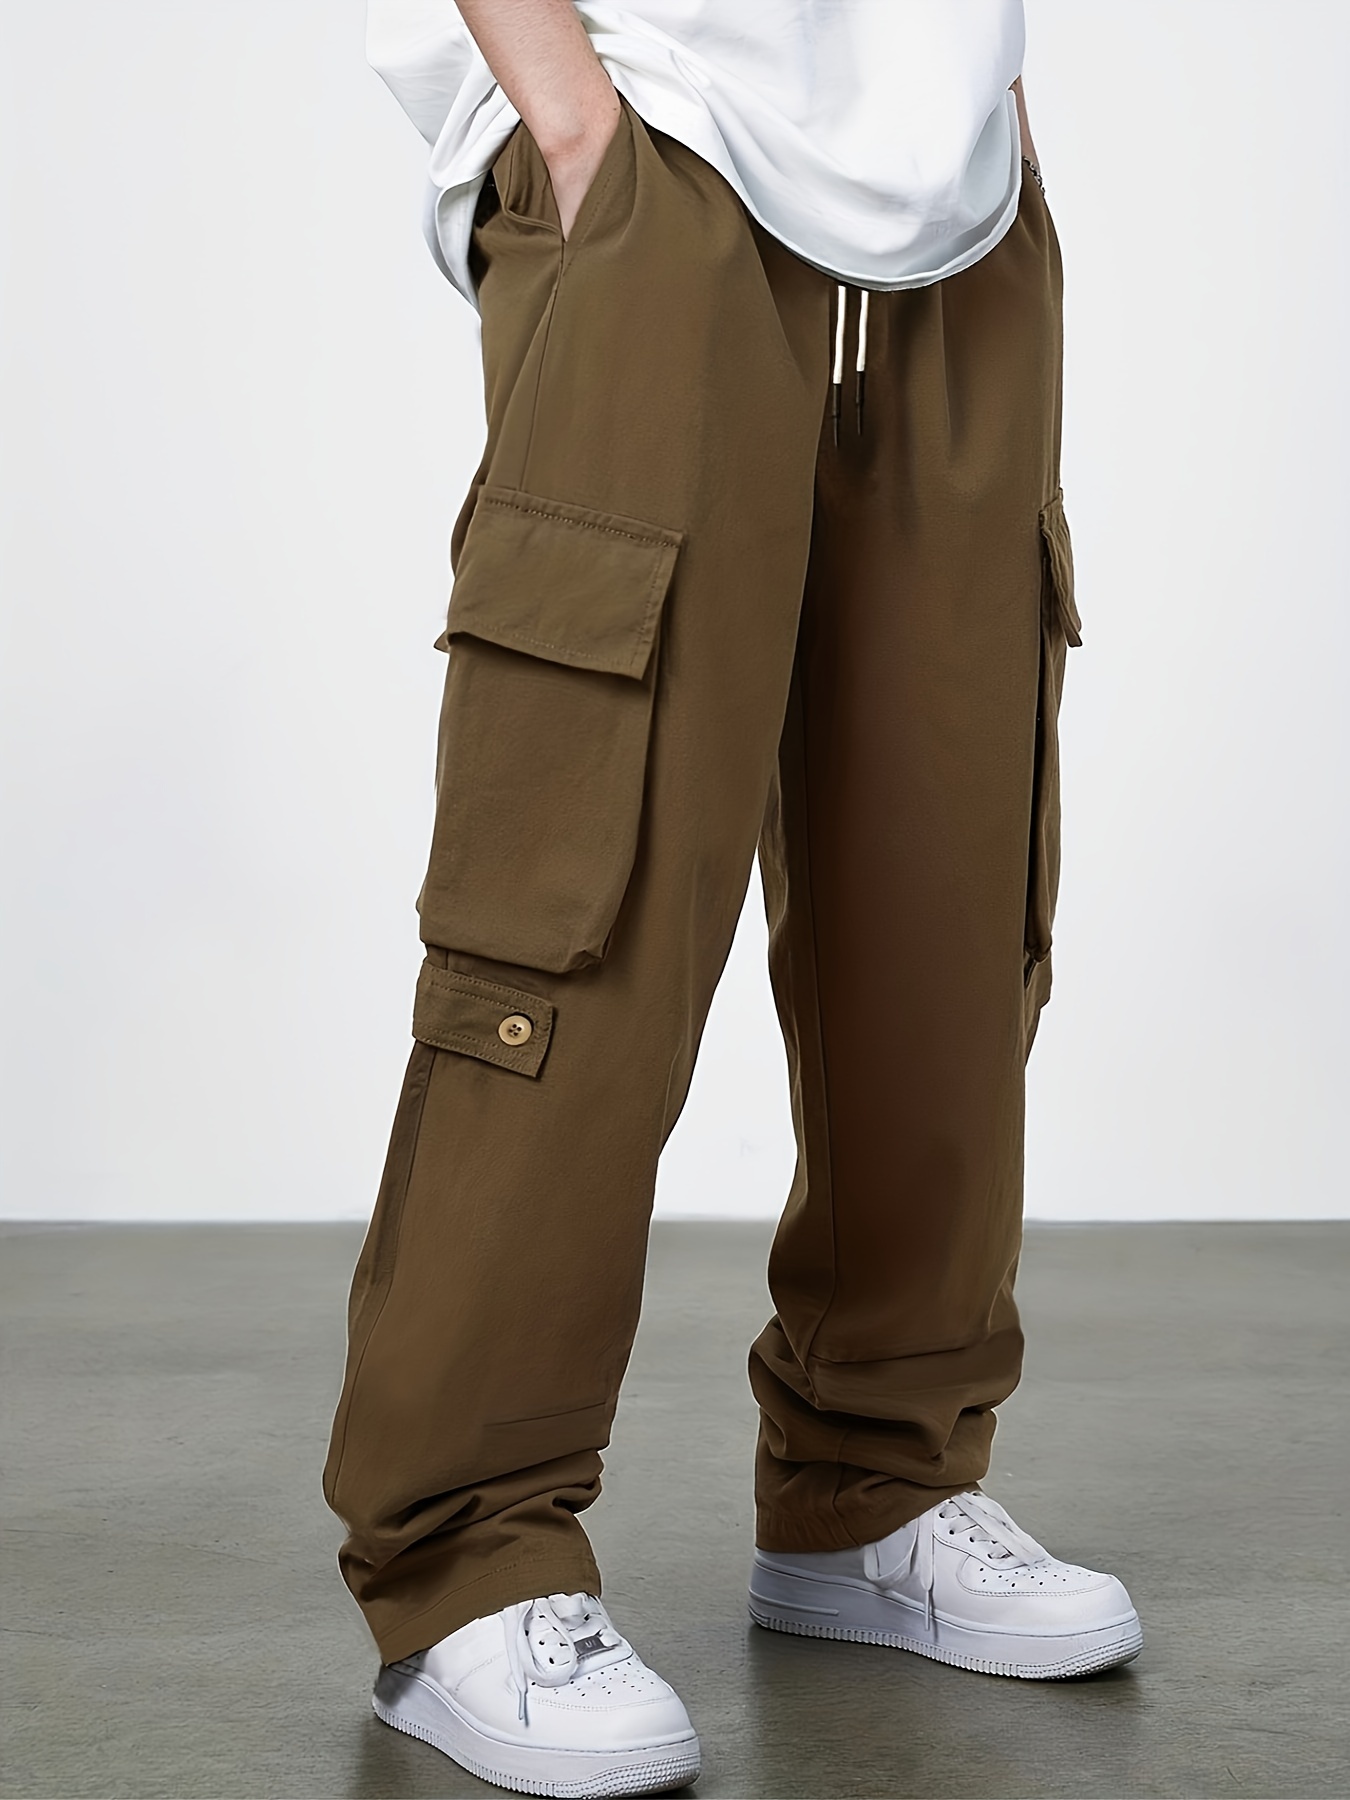 Cargo Pants Women Fashion Solid Color High Waisted Drawstring With Pockets  Loose Fitted Casual Comfy Work Pants